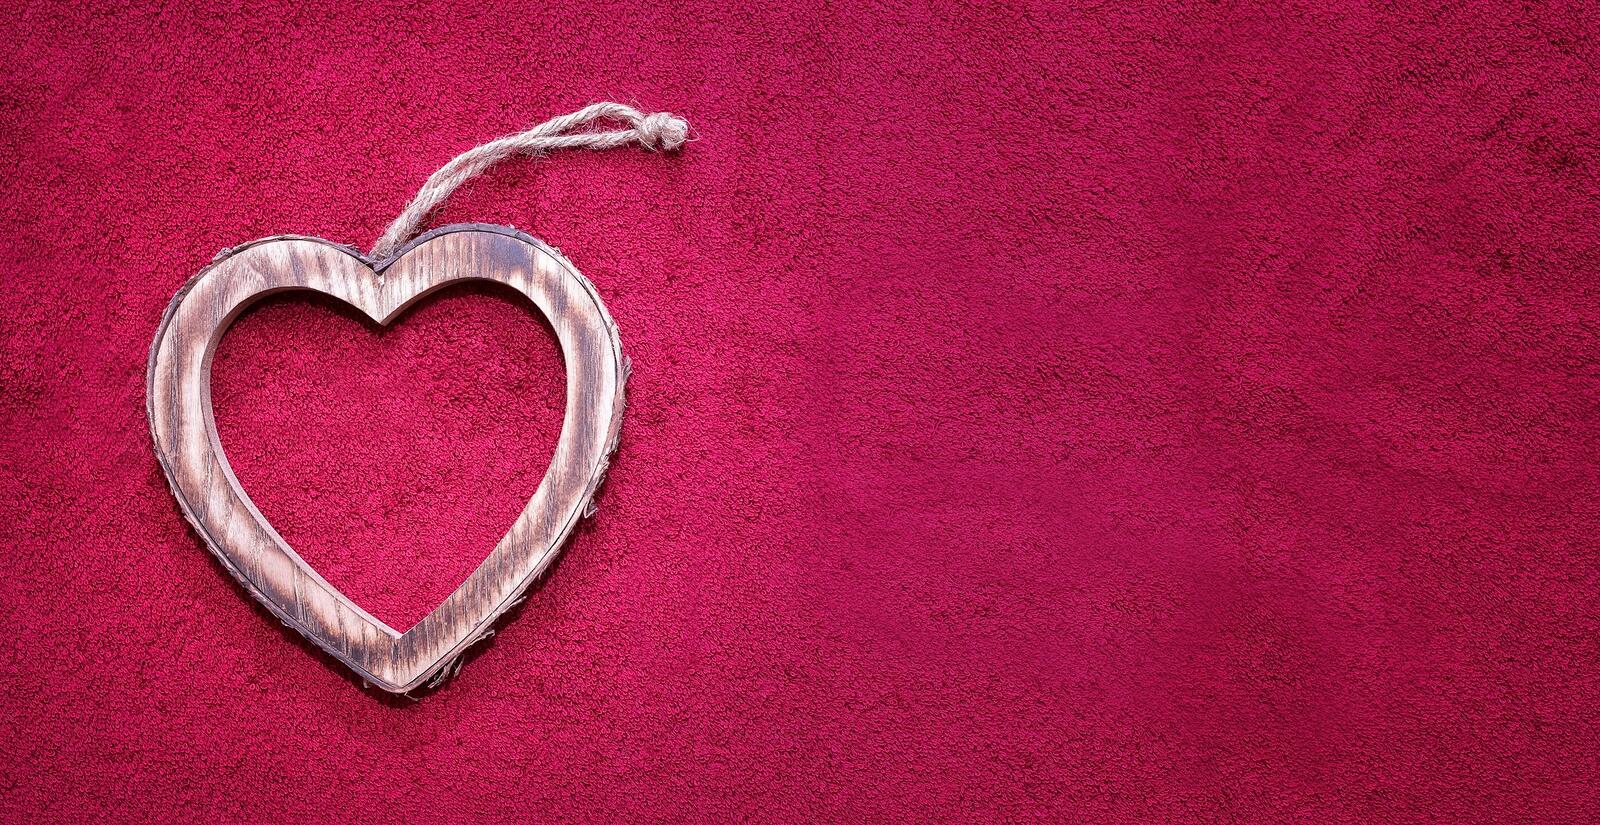 Free photo Wooden keychain in the shape of a heart on a pink background